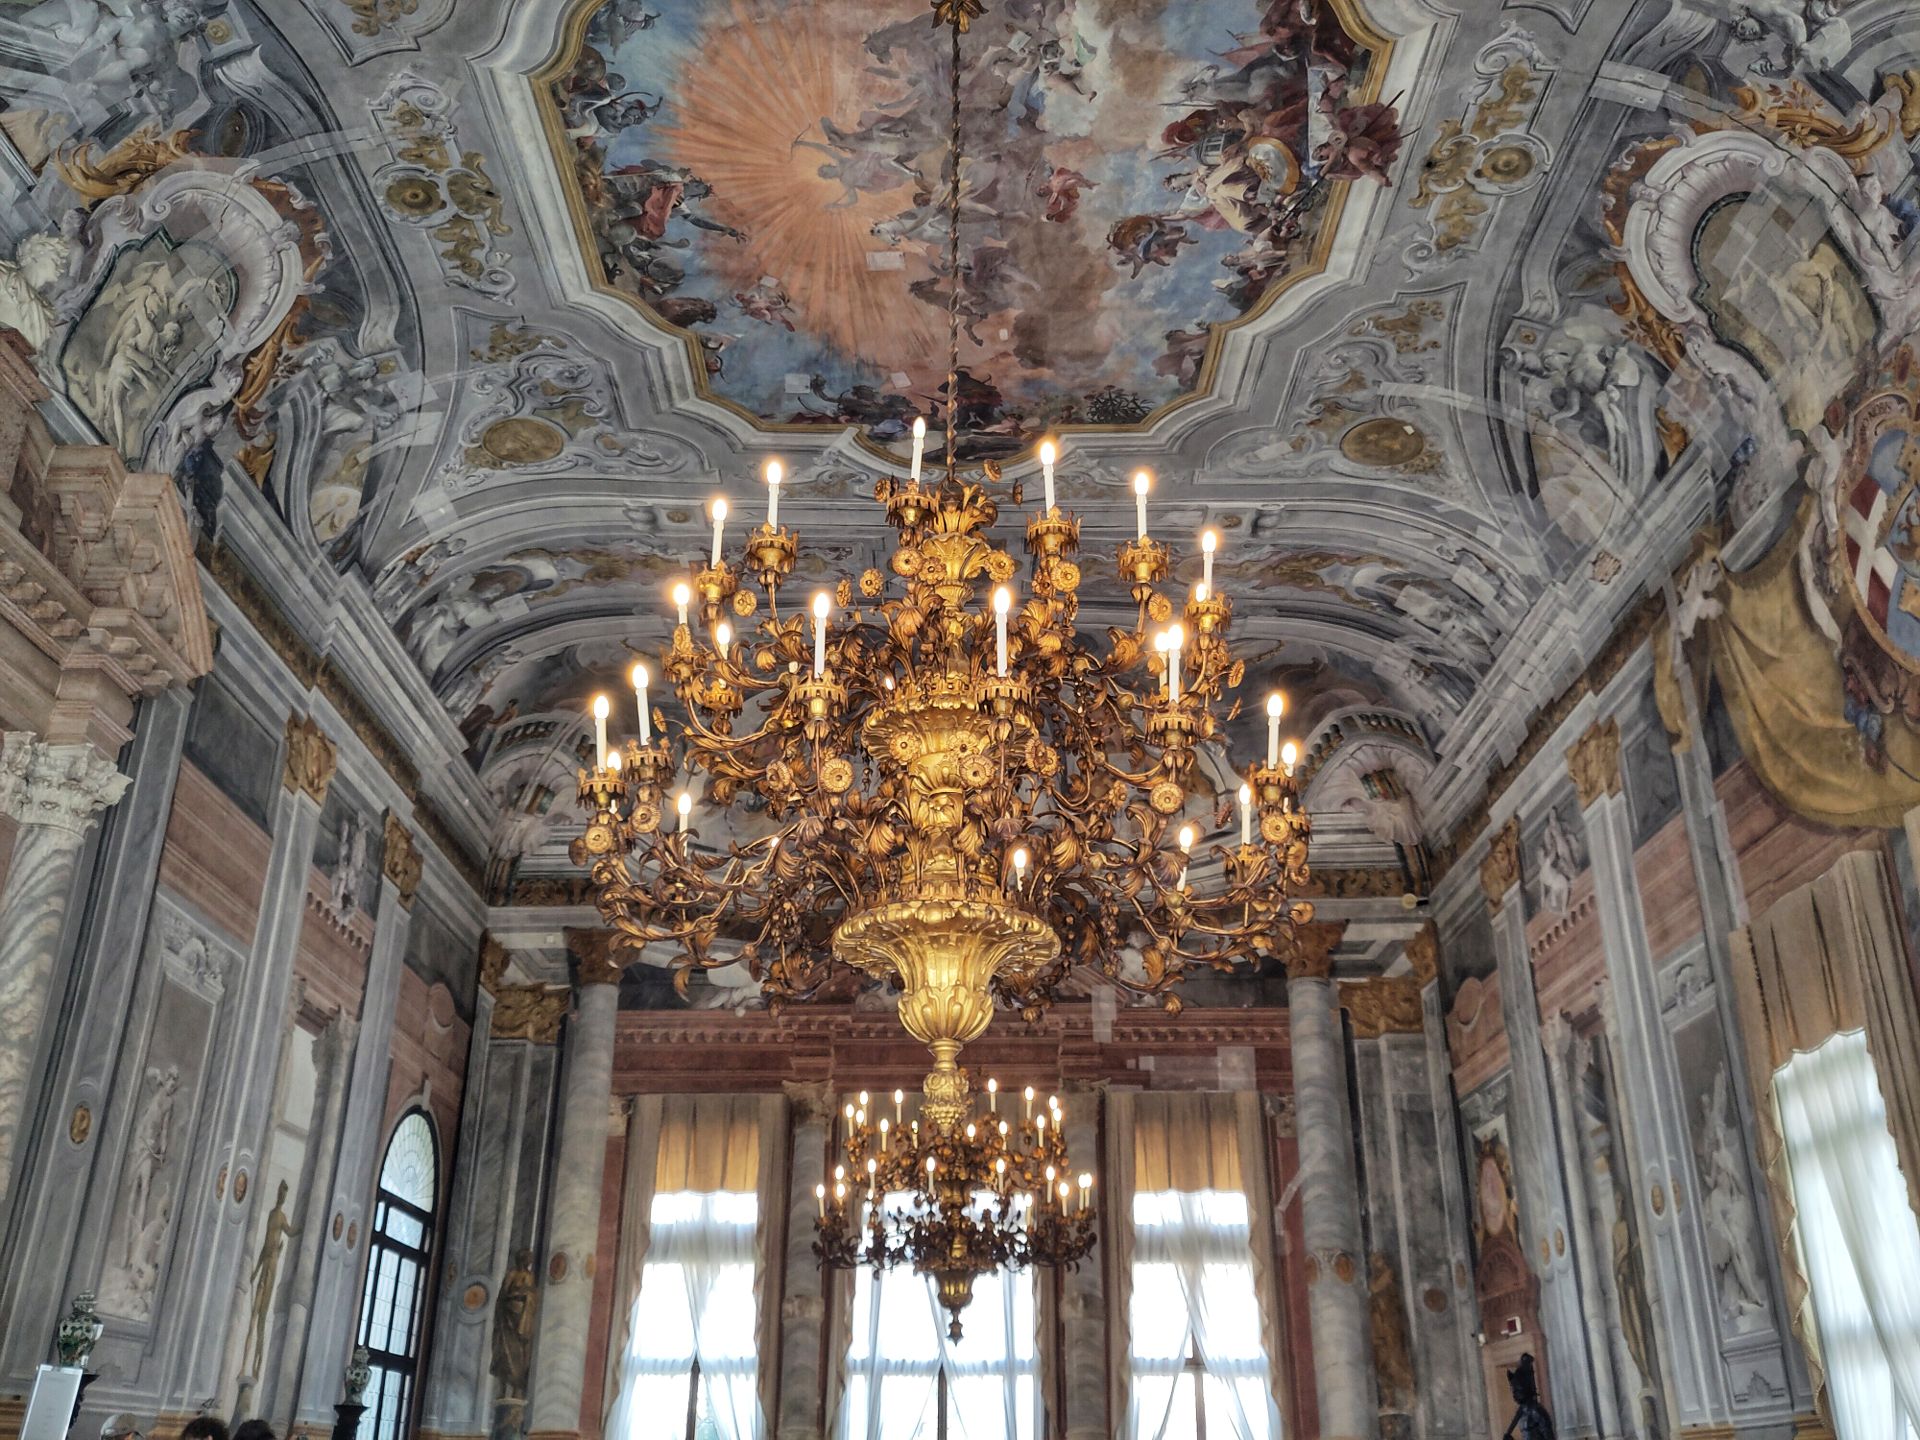 A very ornate chandelier hanging from a very ornate ceiling in an old-style palace.